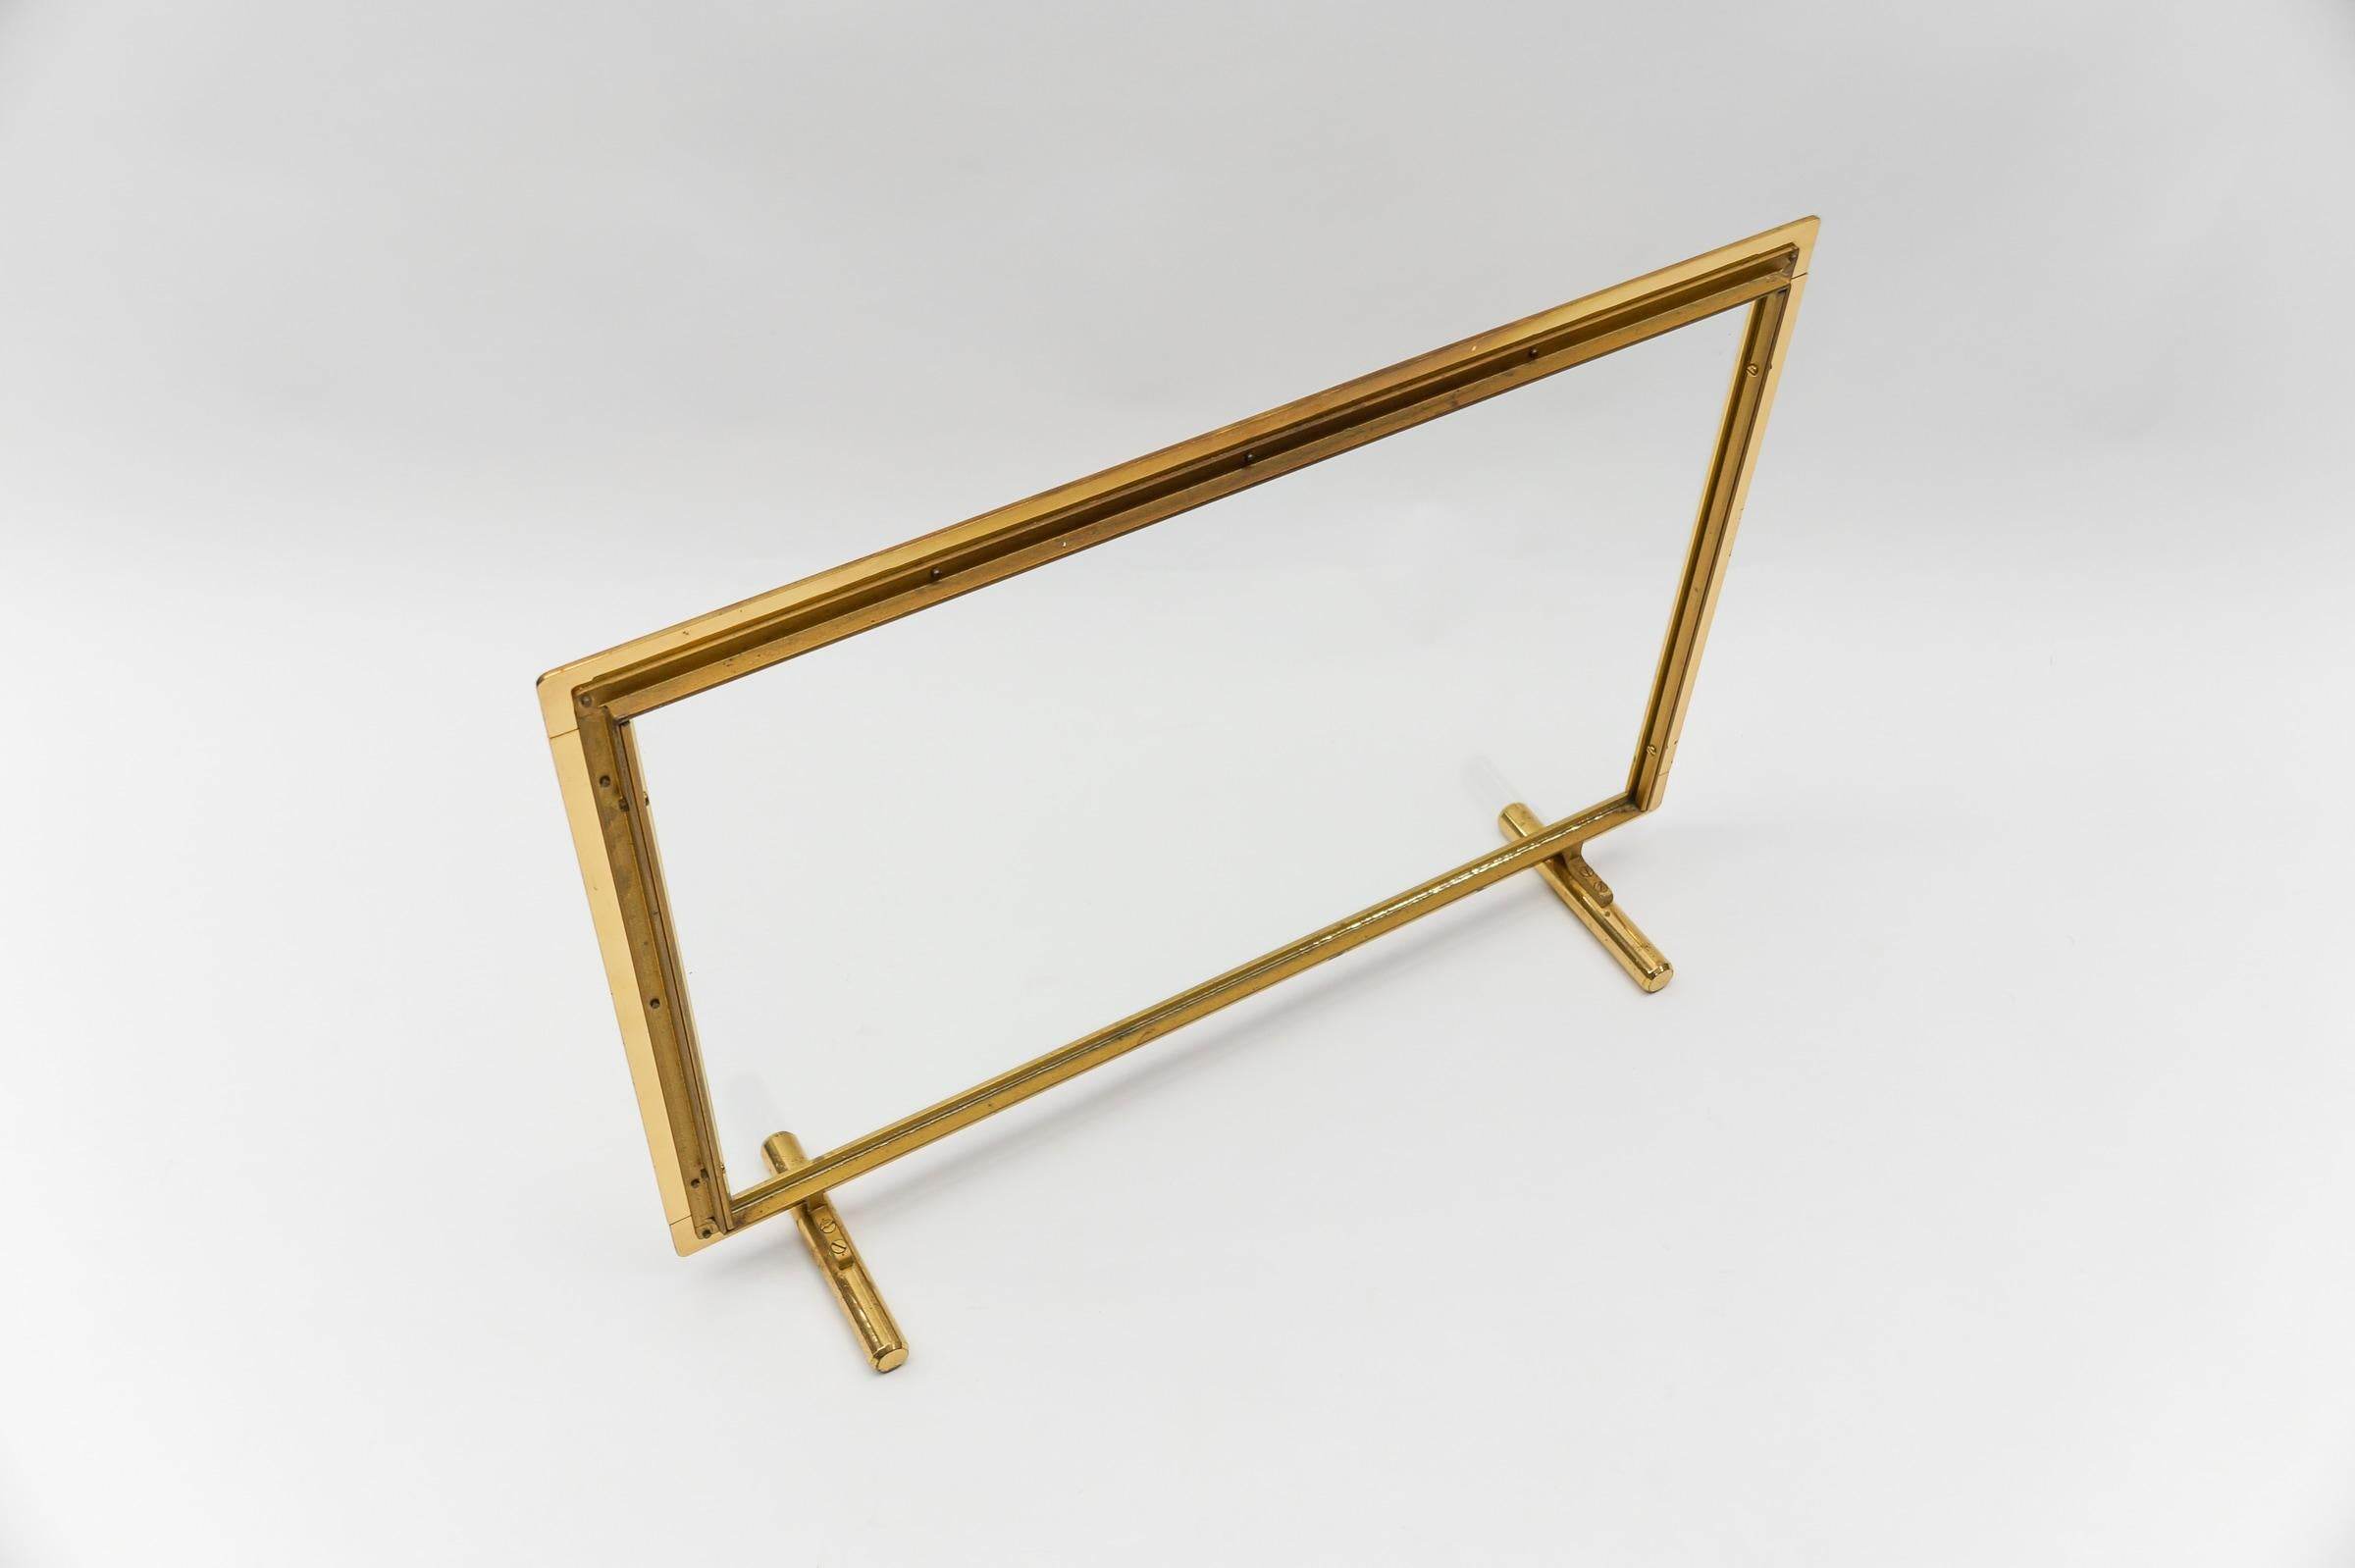 Elegant Mid-Centutry Modern Fireplace Screen in Gold and Glass, 1970s Italy For Sale 1